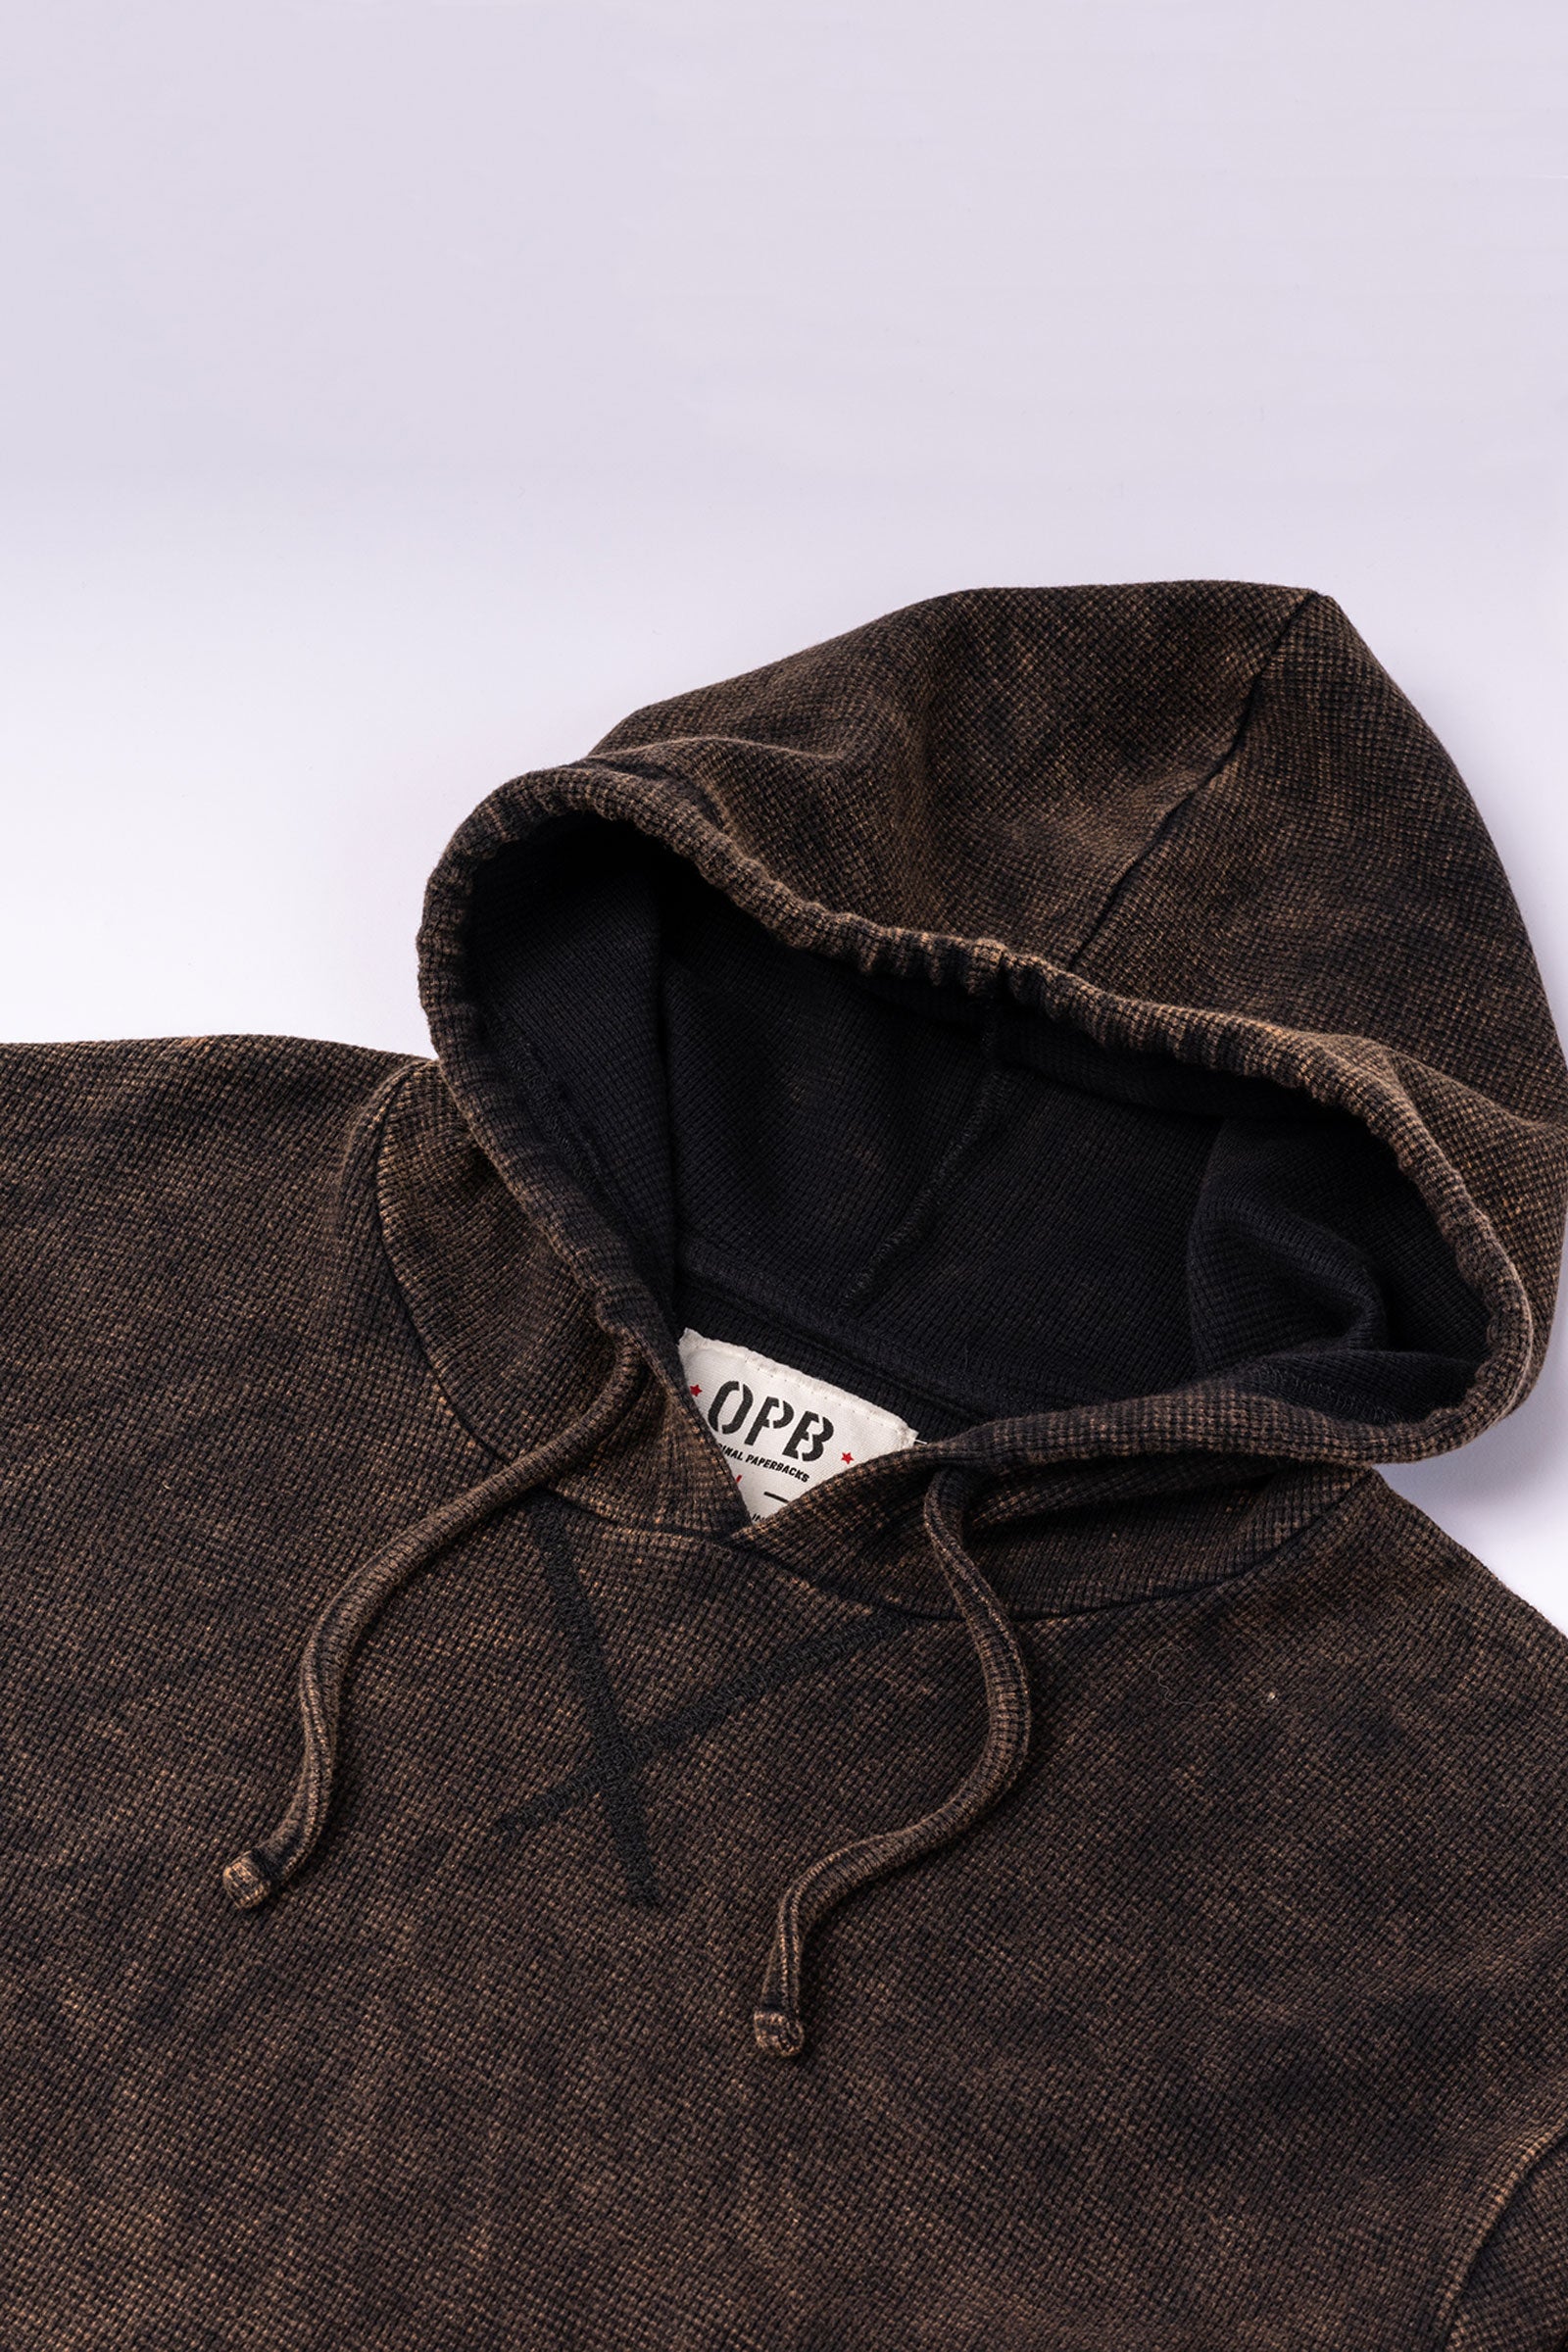 Original Paperbacks Waffle Knit Hoodie in Copper front detail view